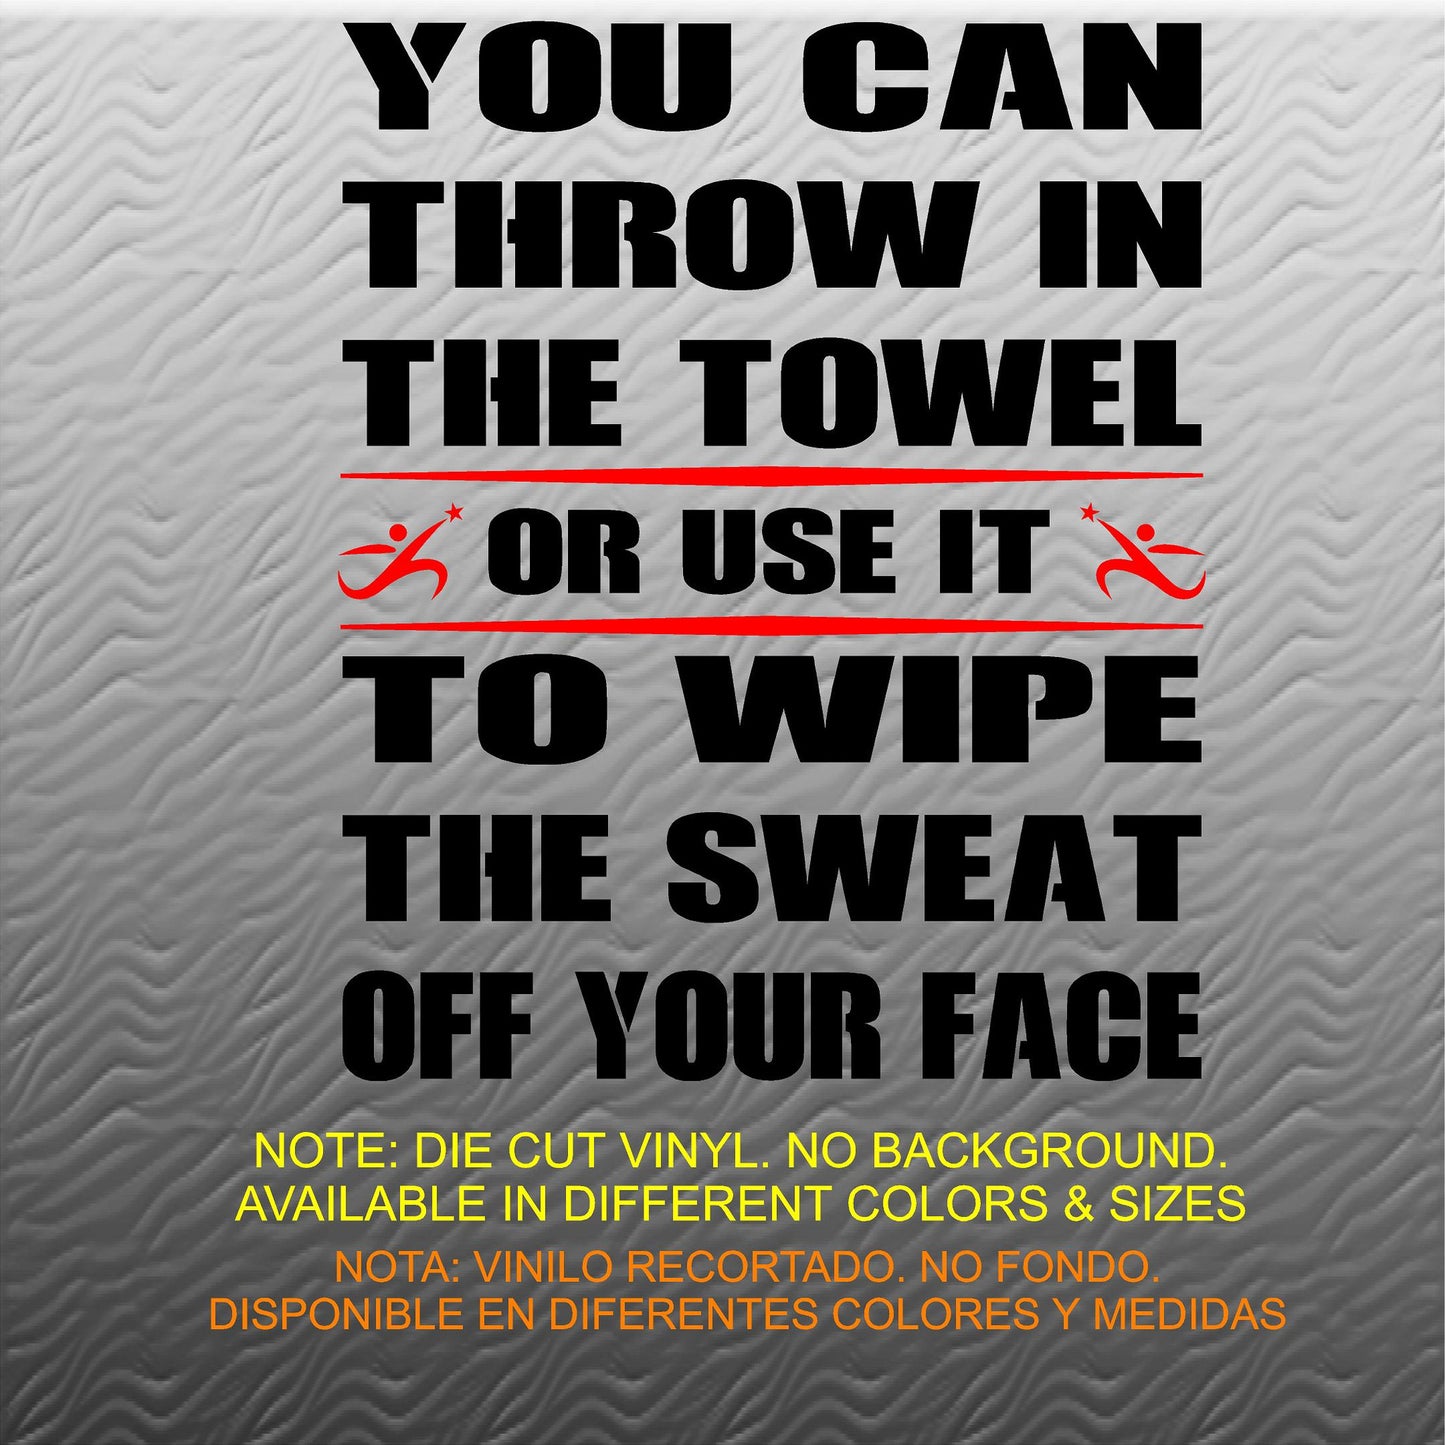 Stickers. Vinyl Wall Decal. Fitness. Gym. Exercise: You can throw in the towel or use it to wipe the sweat...